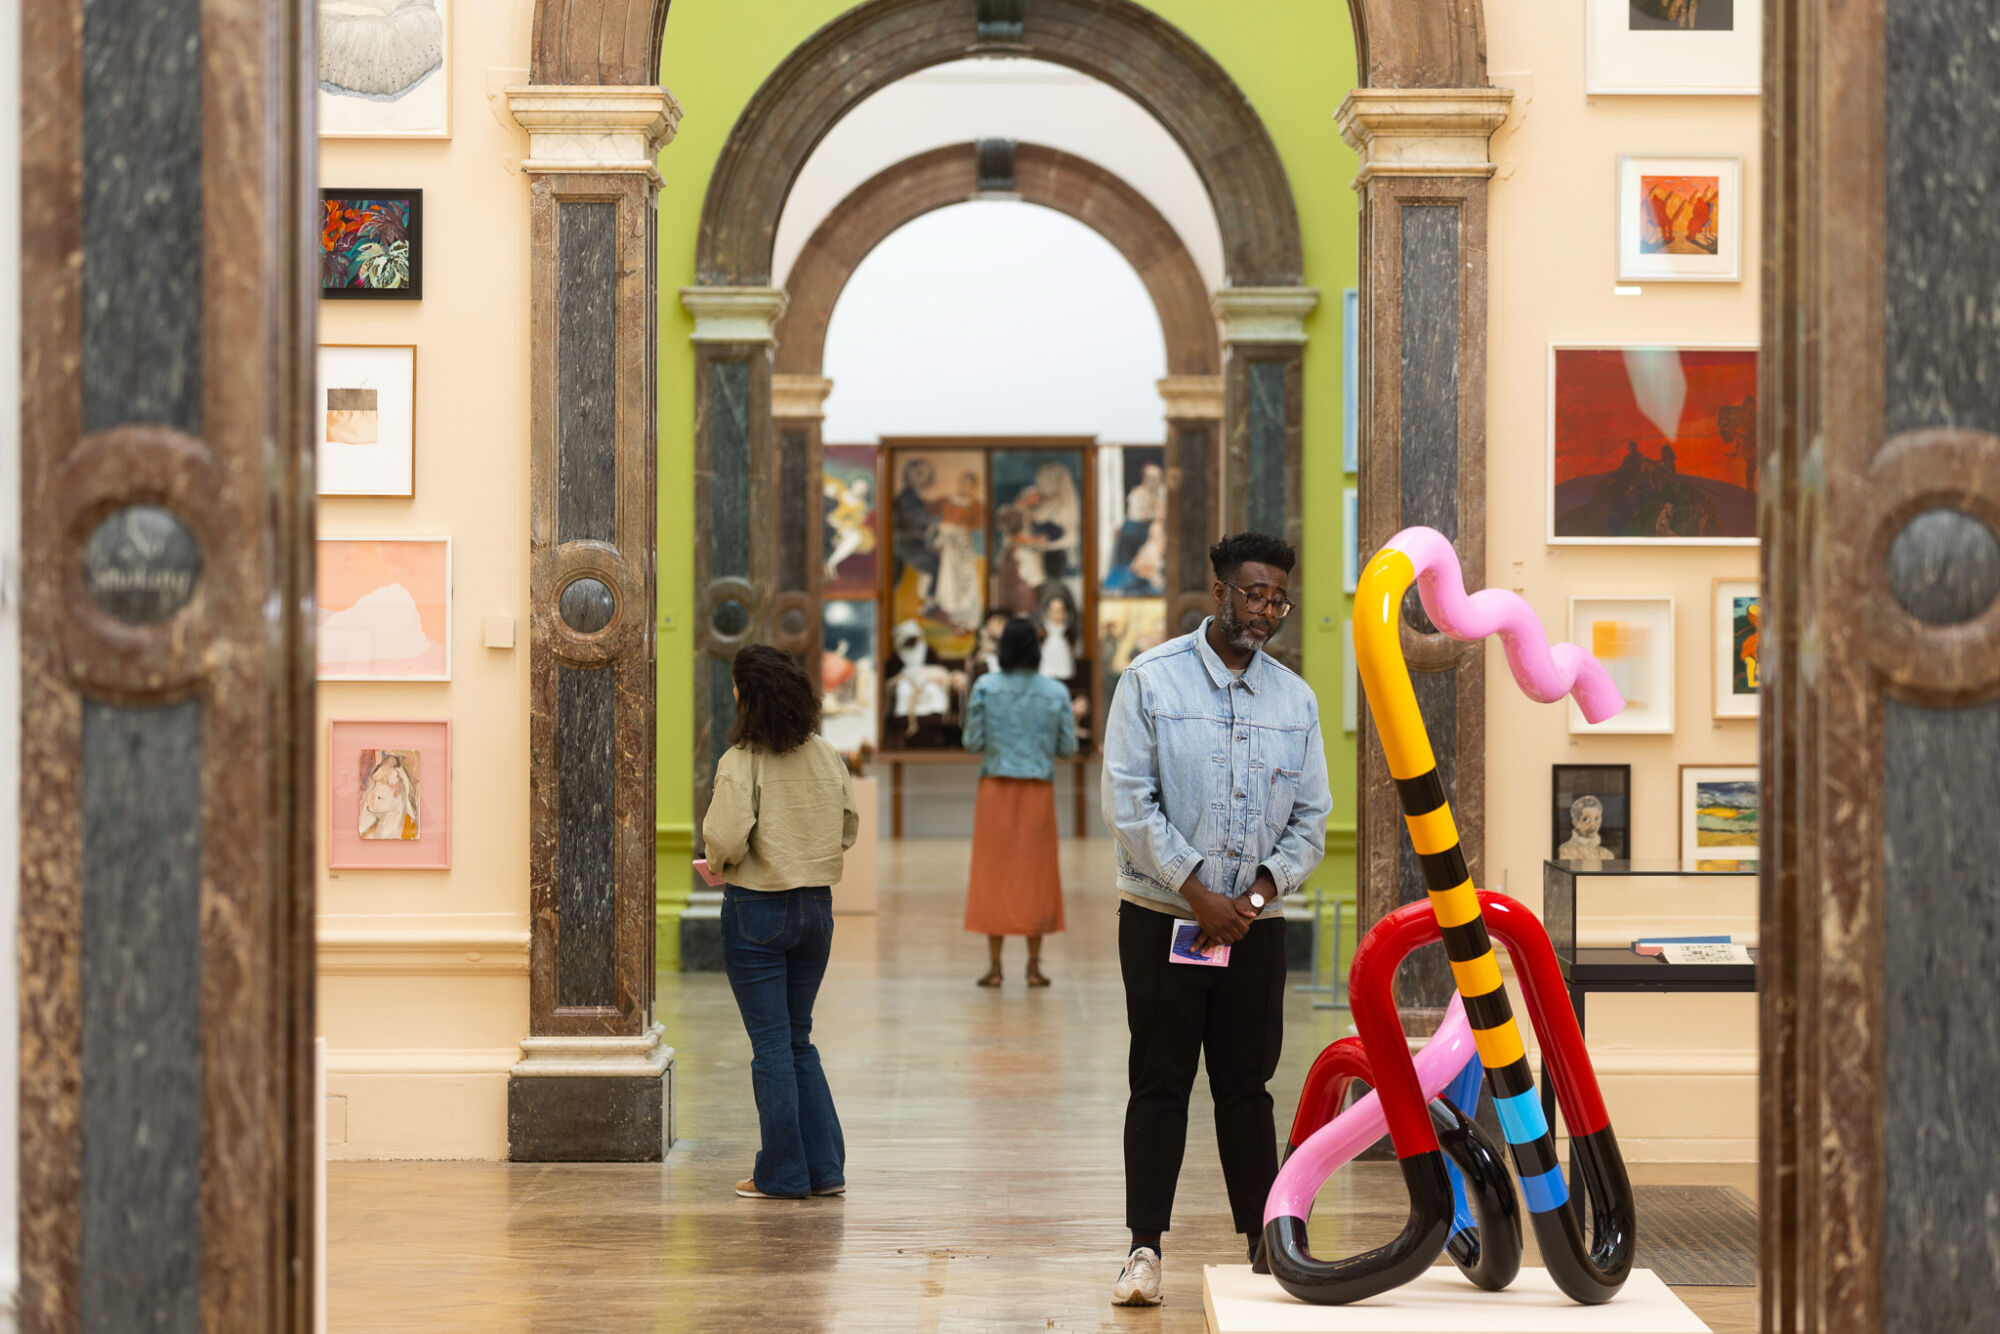 The Wick - Installation view of the Summer Exhibition 2023 at the Royal Academy of Arts in London, 13 June - 20 August 2023.
Photo: © David Parry/ Royal Academy of Arts